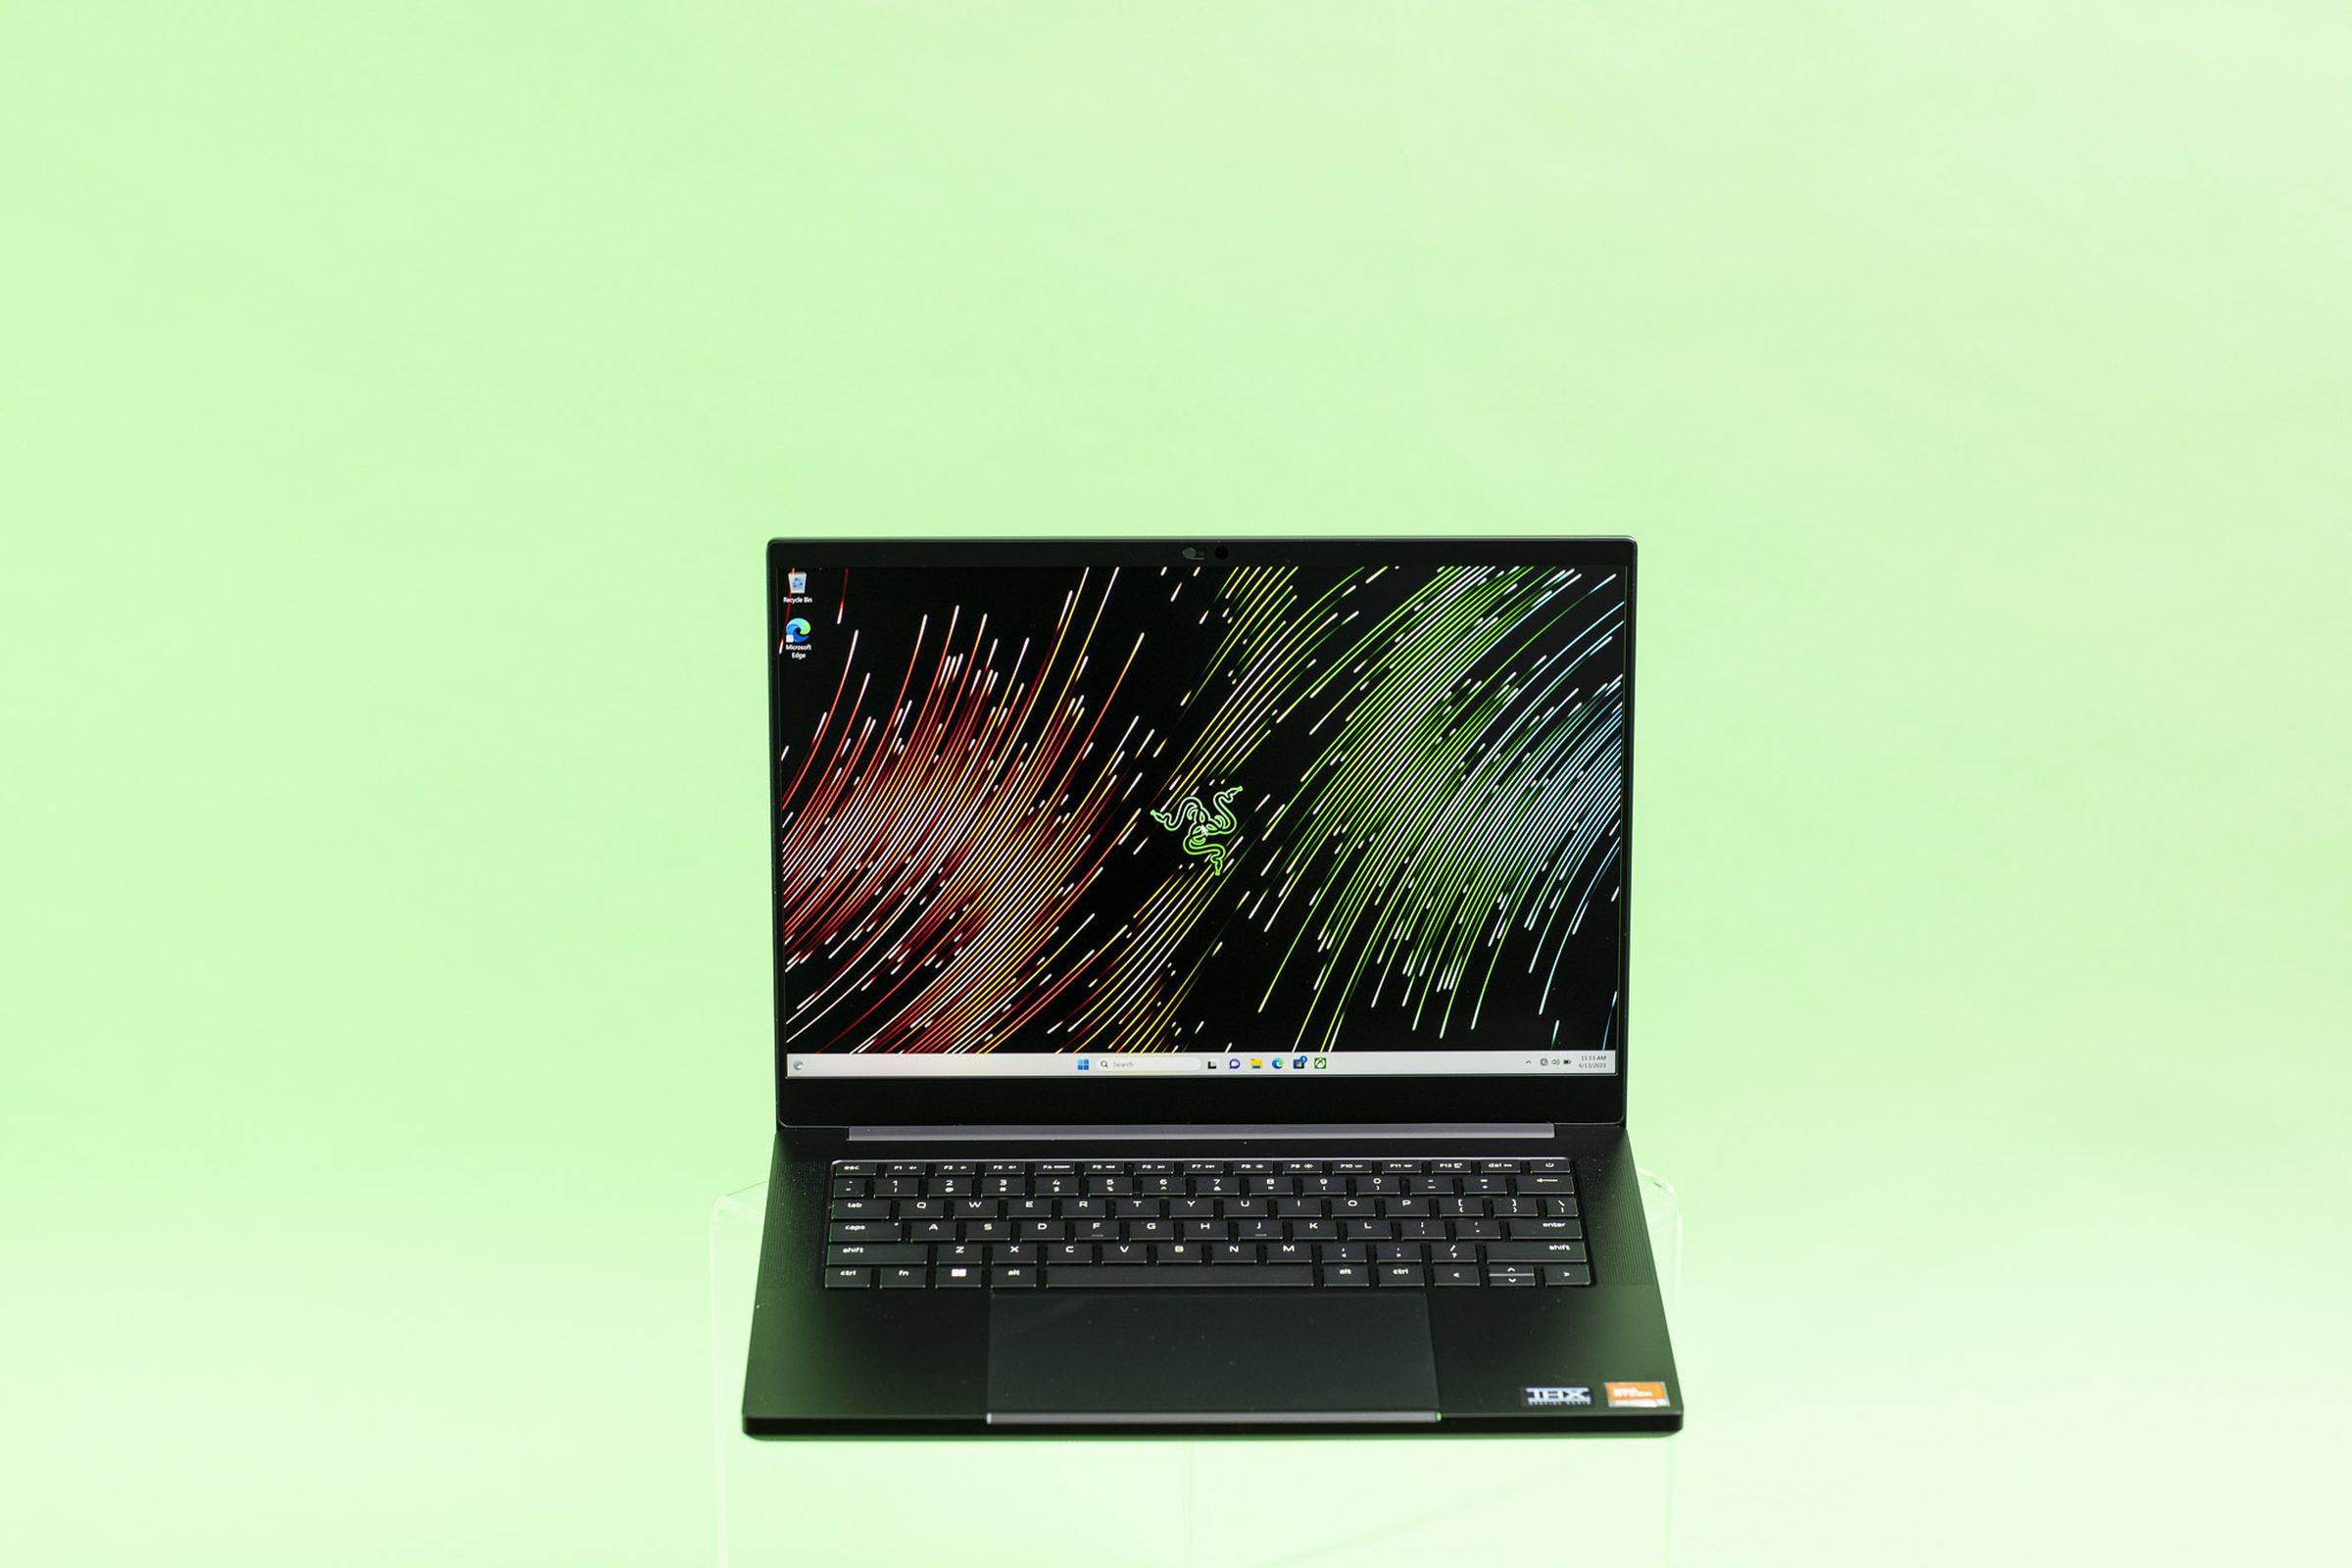 Razer Blade 14 seen from the front on a green background.